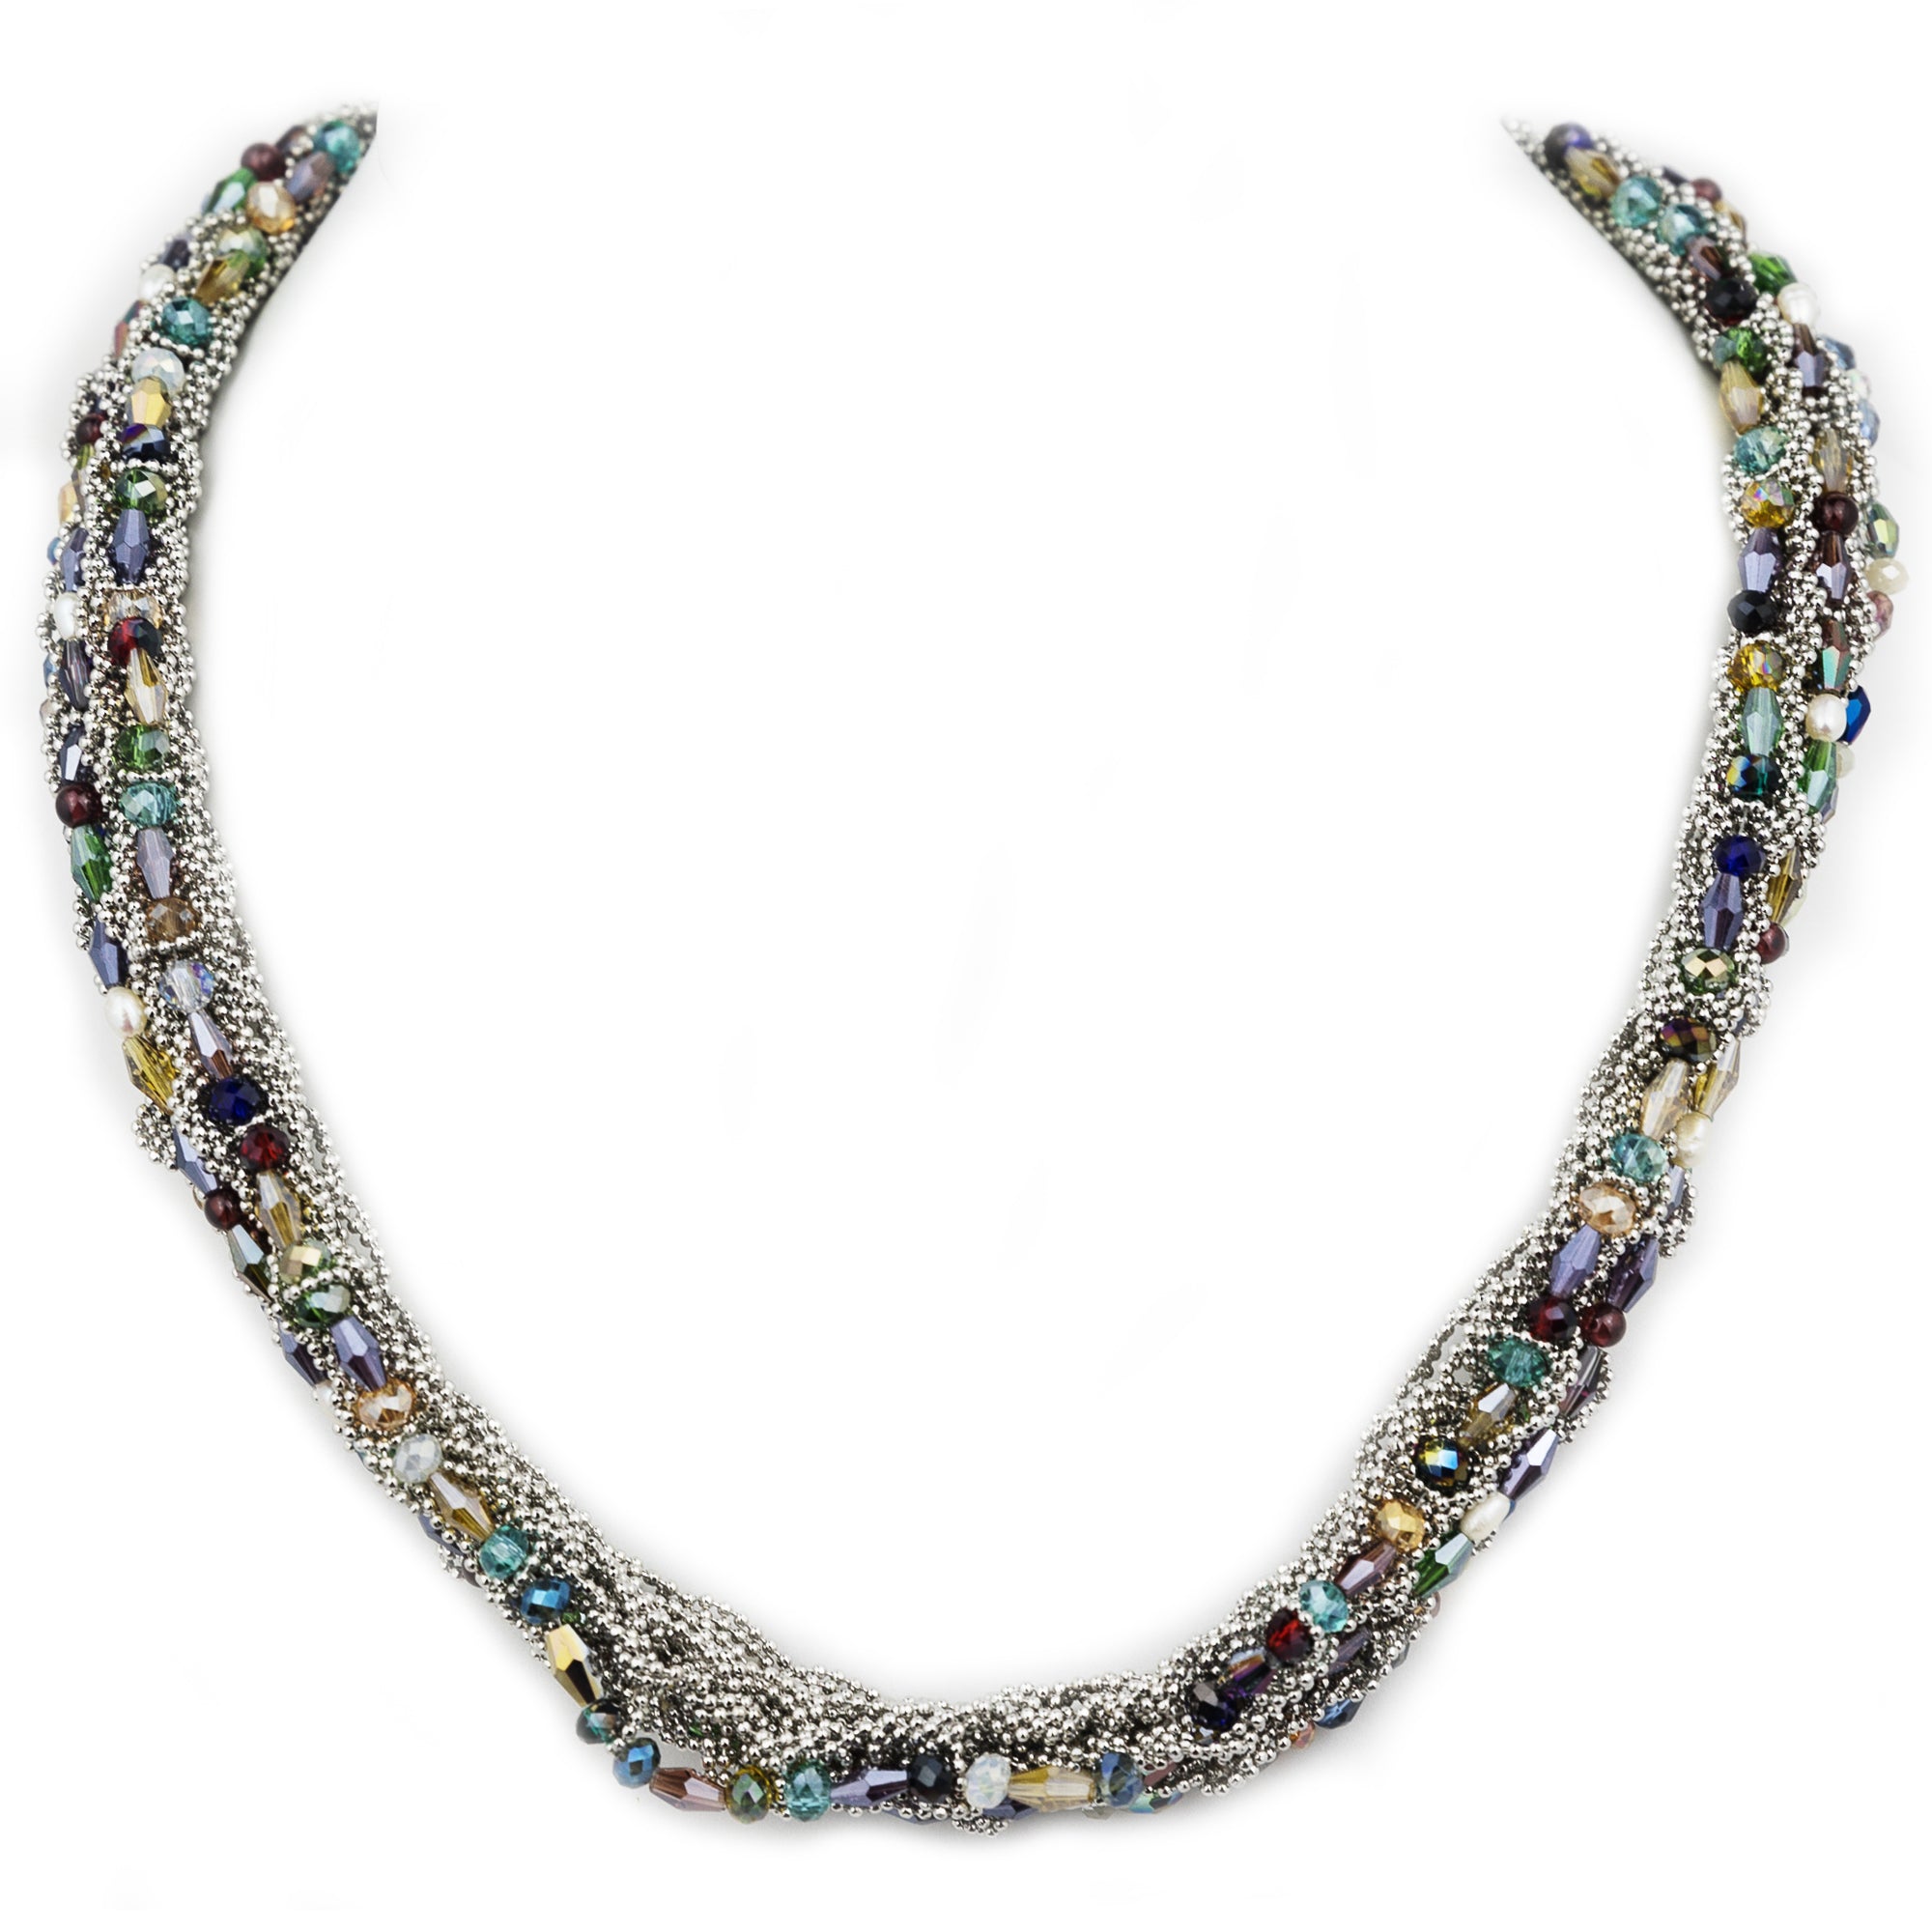 Exquisite Handmade Necklace with Semi-Precious New York, New York Collection N029-01